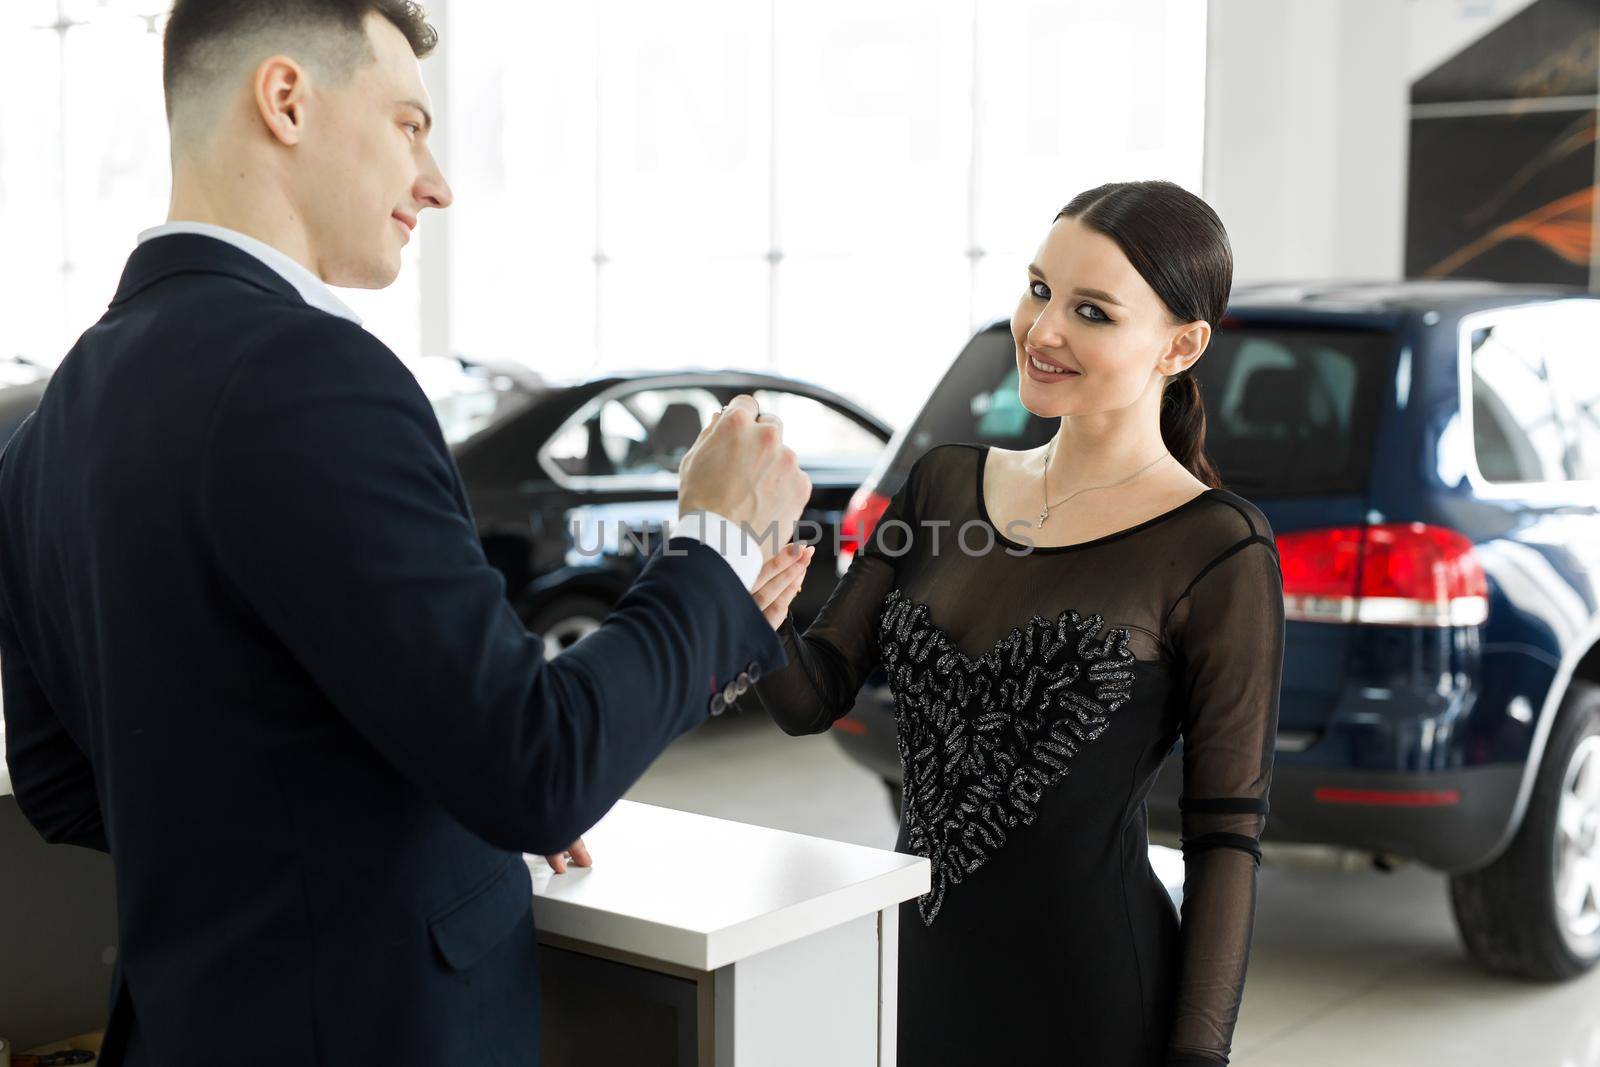 Car rental and Insurance concept, Young salesman receiving money and giving car's key to customer after sign agreement contract with approved good deal for rent or purchase by StudioPeace